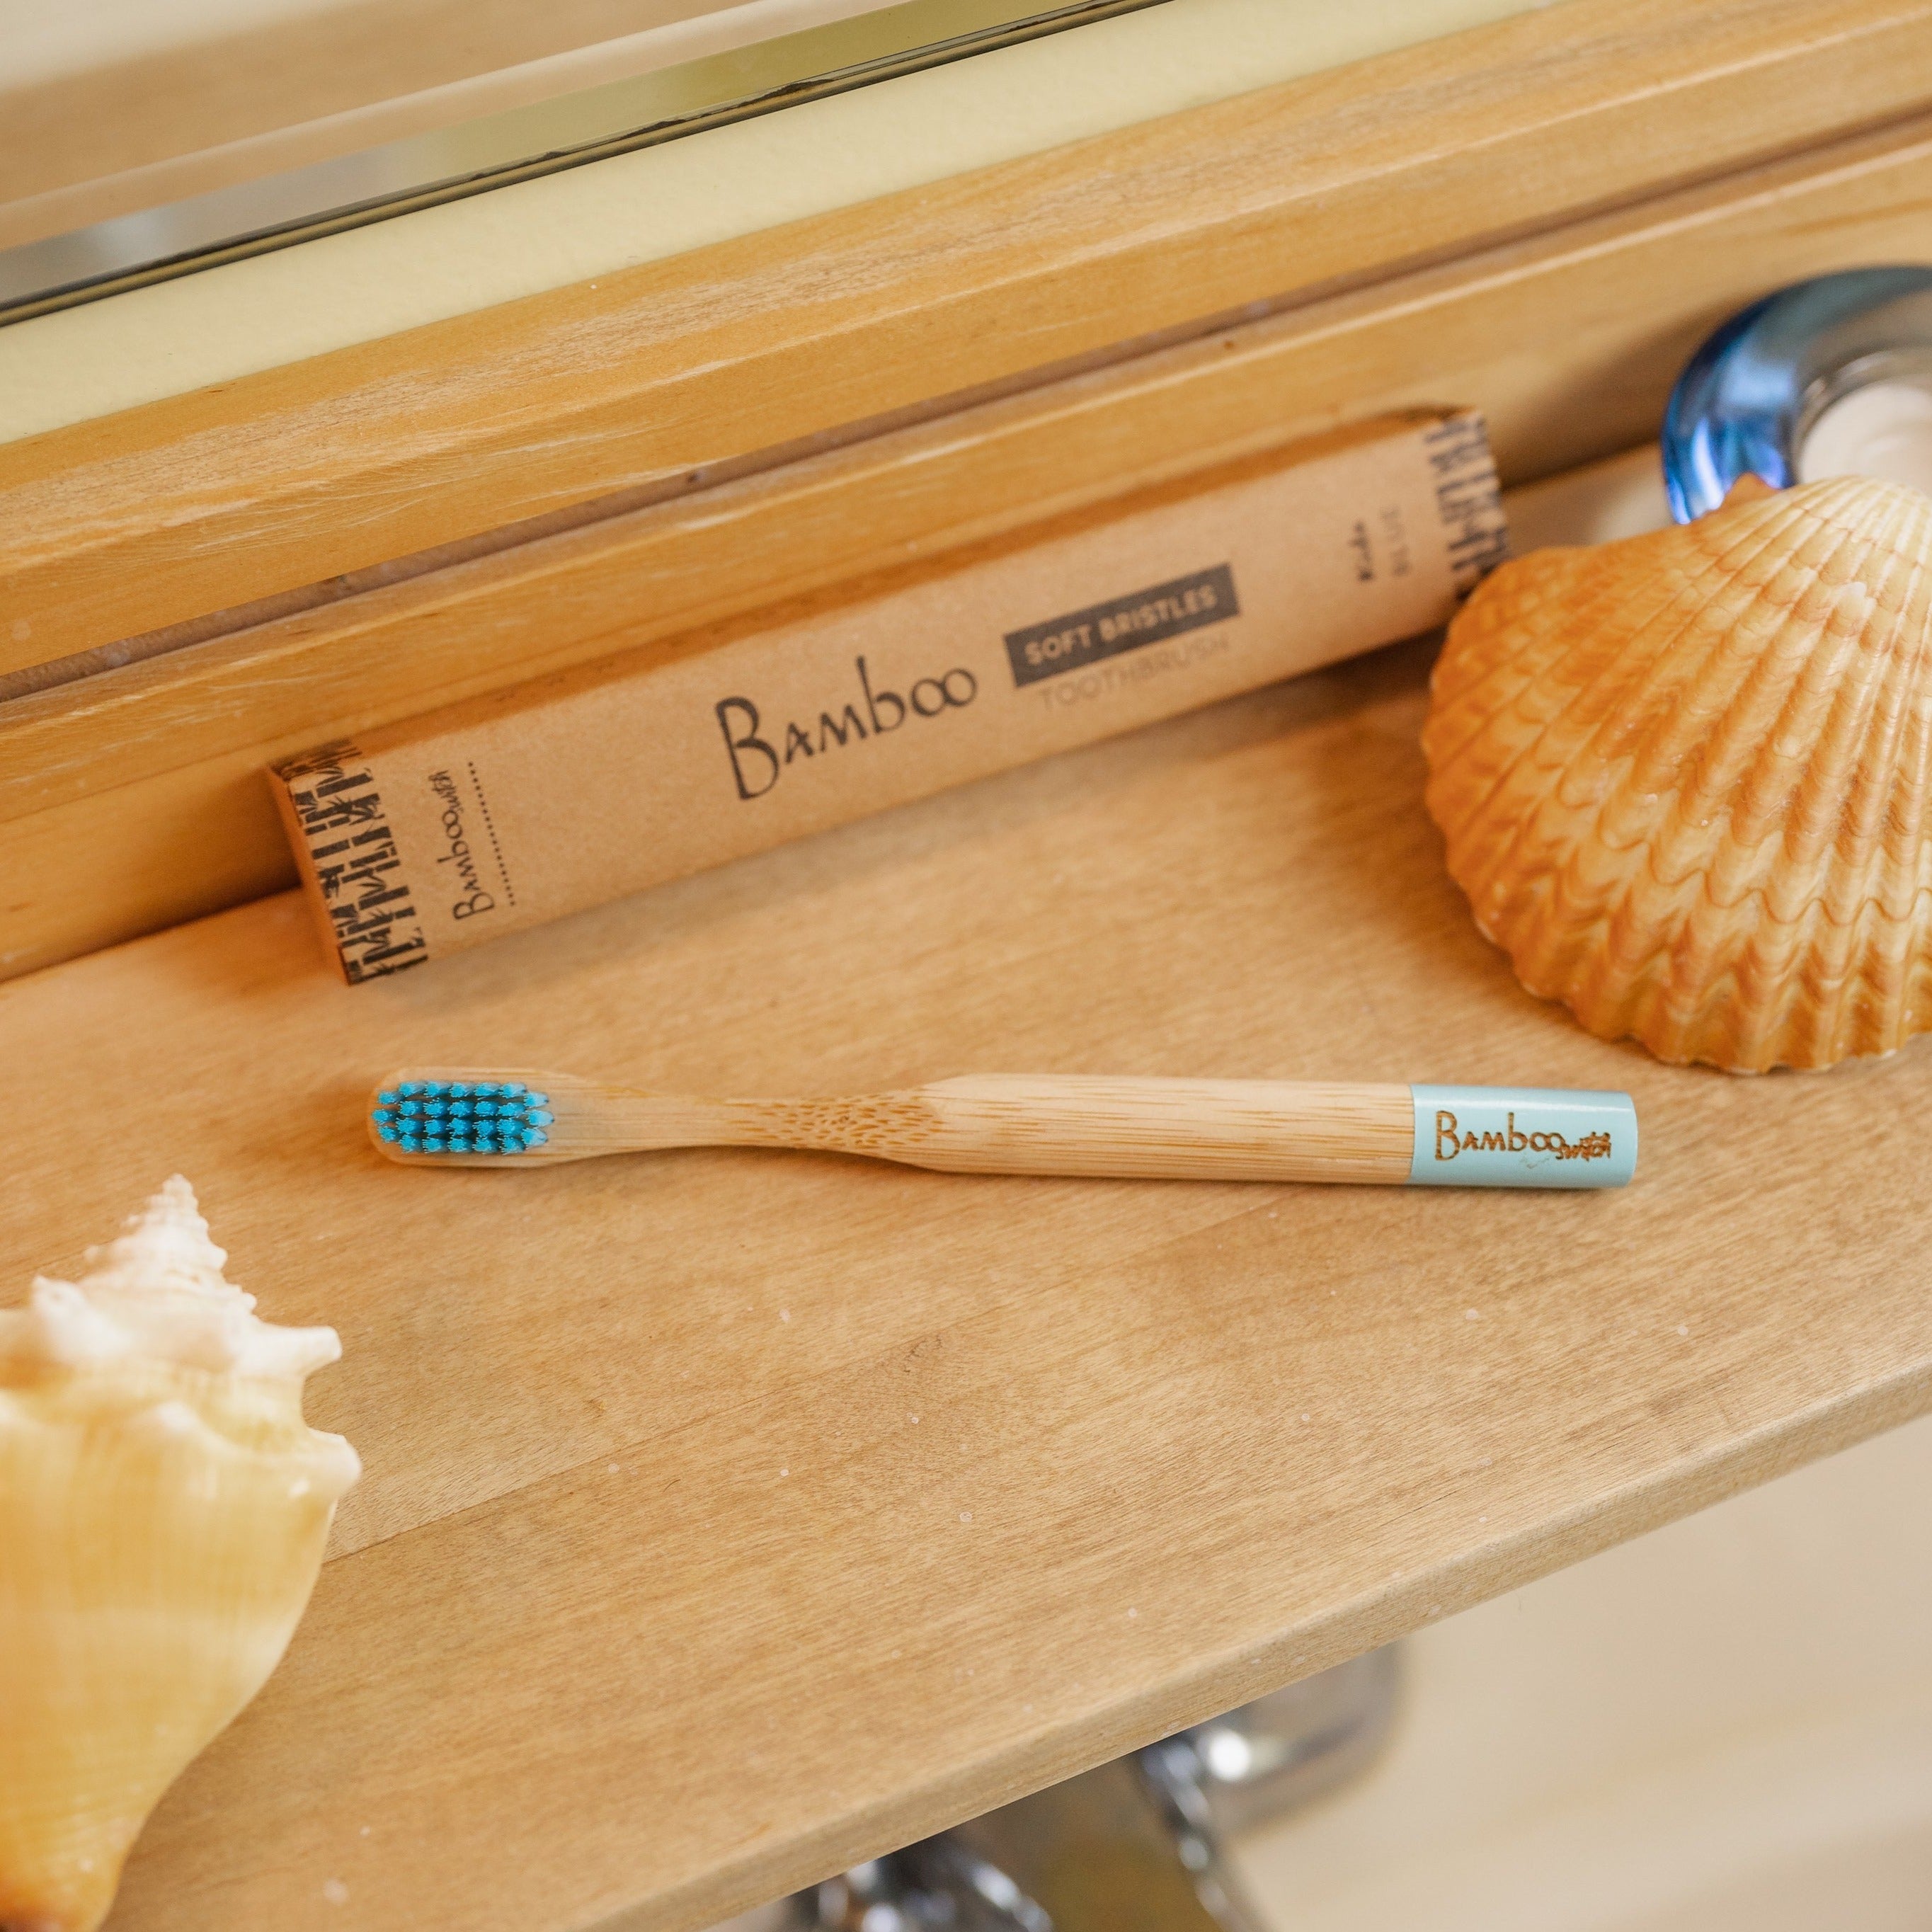 sustainable, zero waste, earth-friendly, plastic-free Bamboo Kids Toothbrush | Round Handle - Bamboo Switch